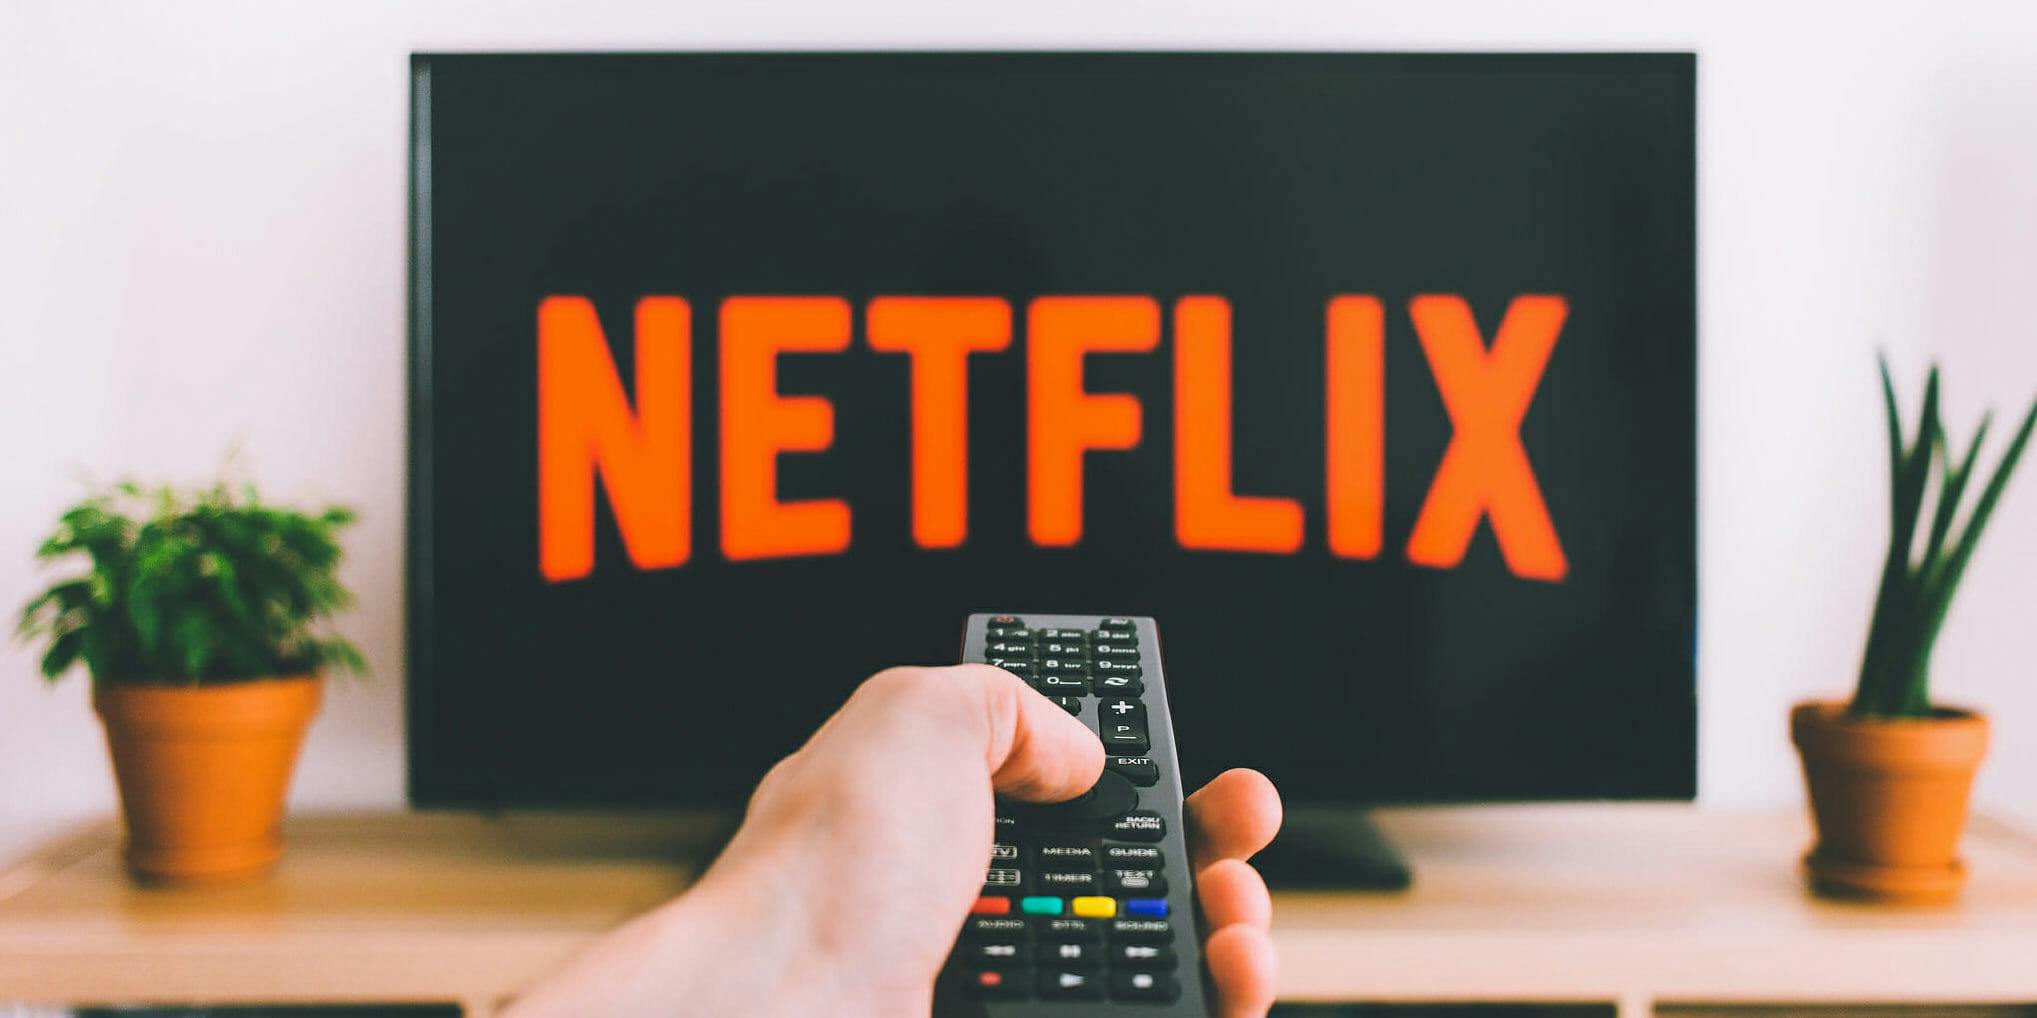 Netflix Devices: How Many Devices Can You Use With Netflix?